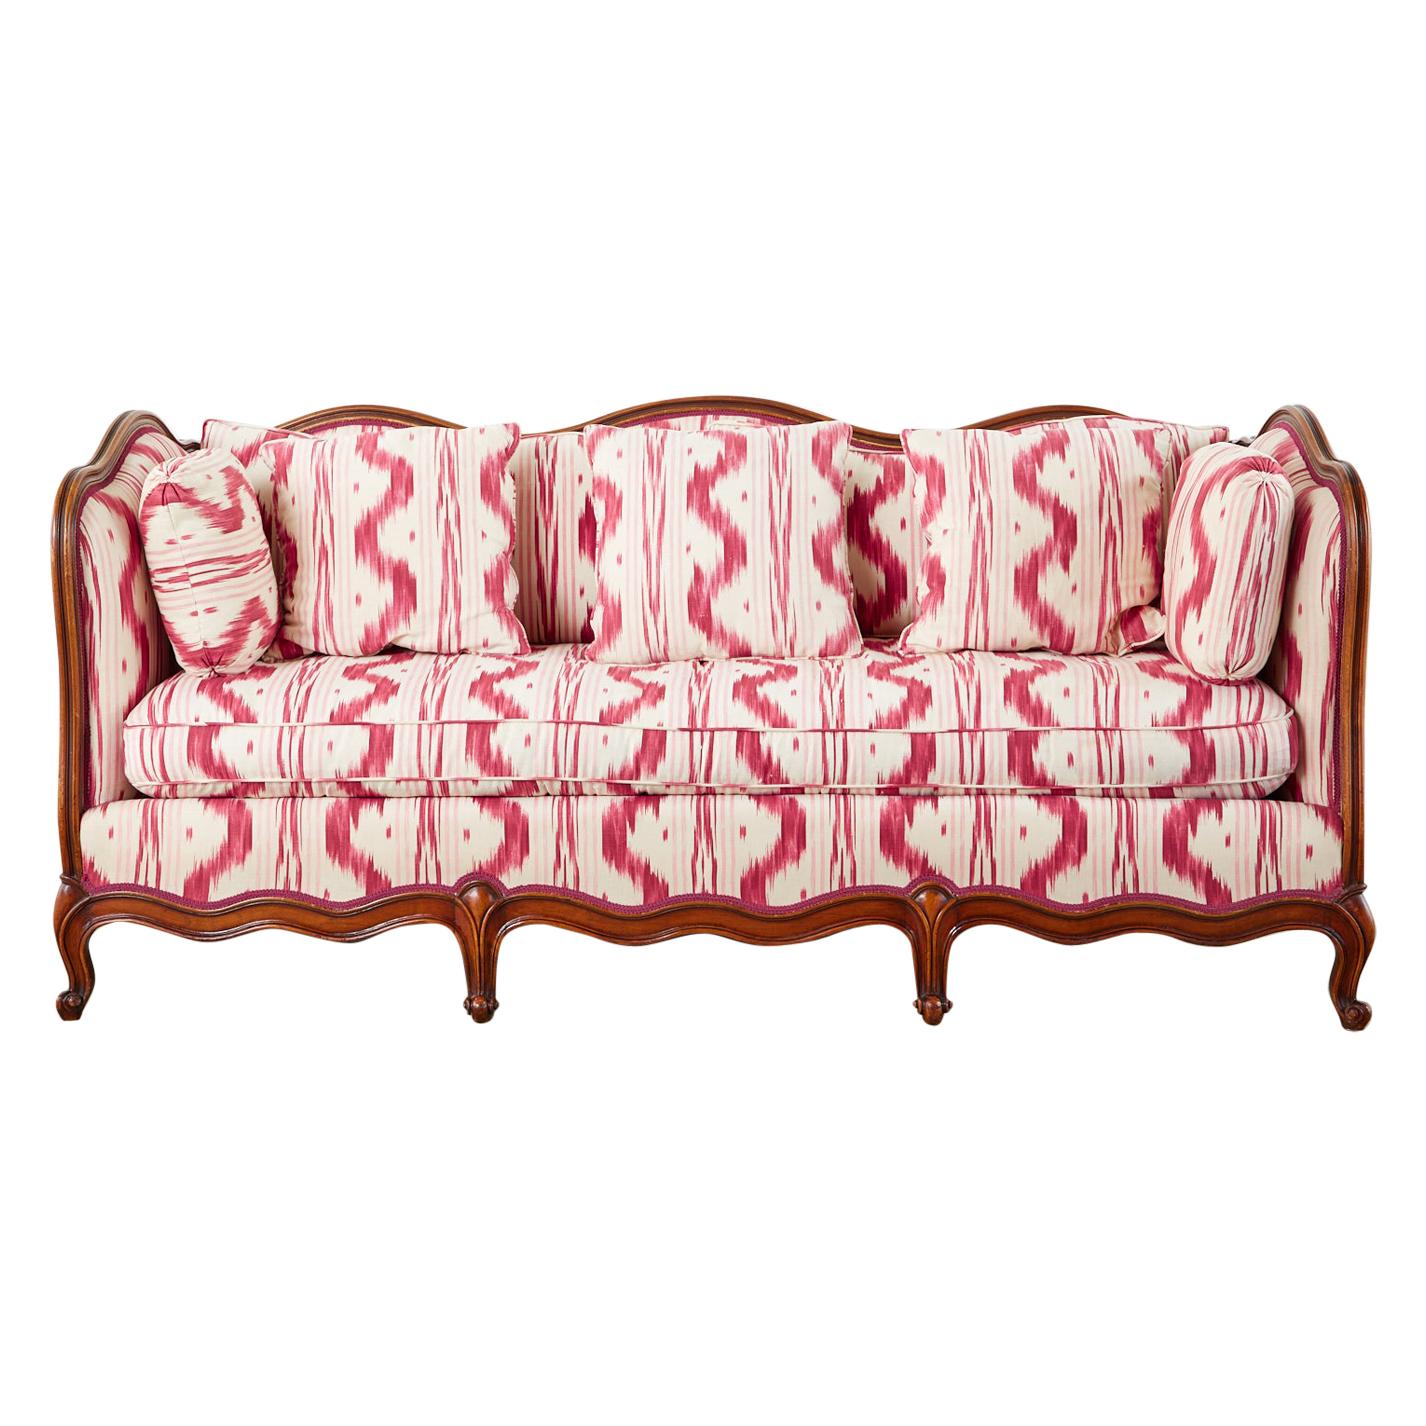 French Provincial Serpentine Canape Settee Pierre Frey Toile Ikat